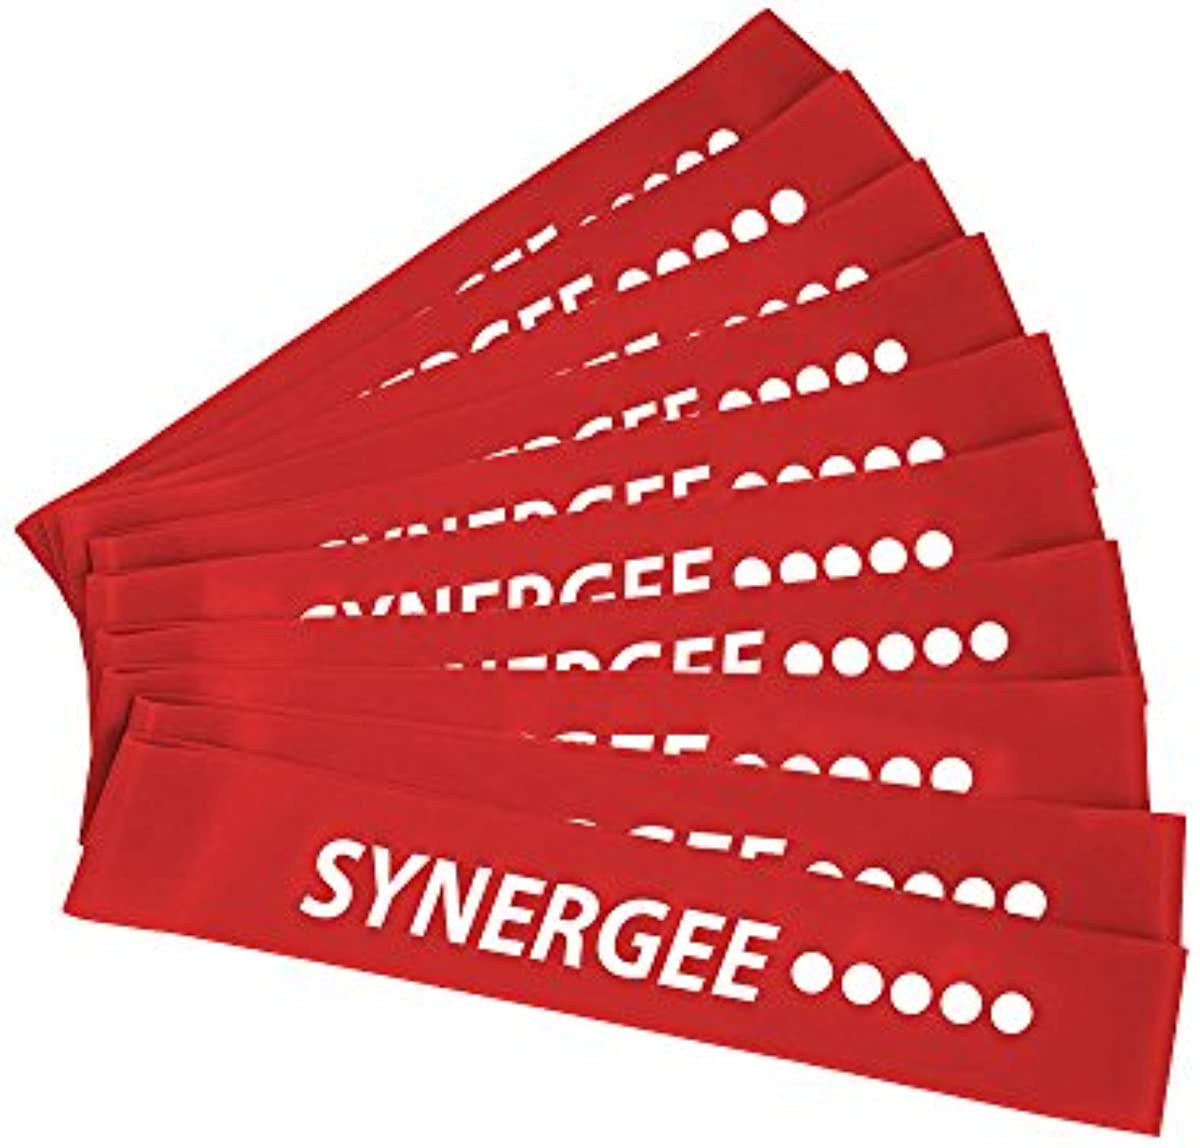 Synergee Exercise Fitness Resistance Band Mini Loop Bands That Perform Better When Working Out at Home or The Gym